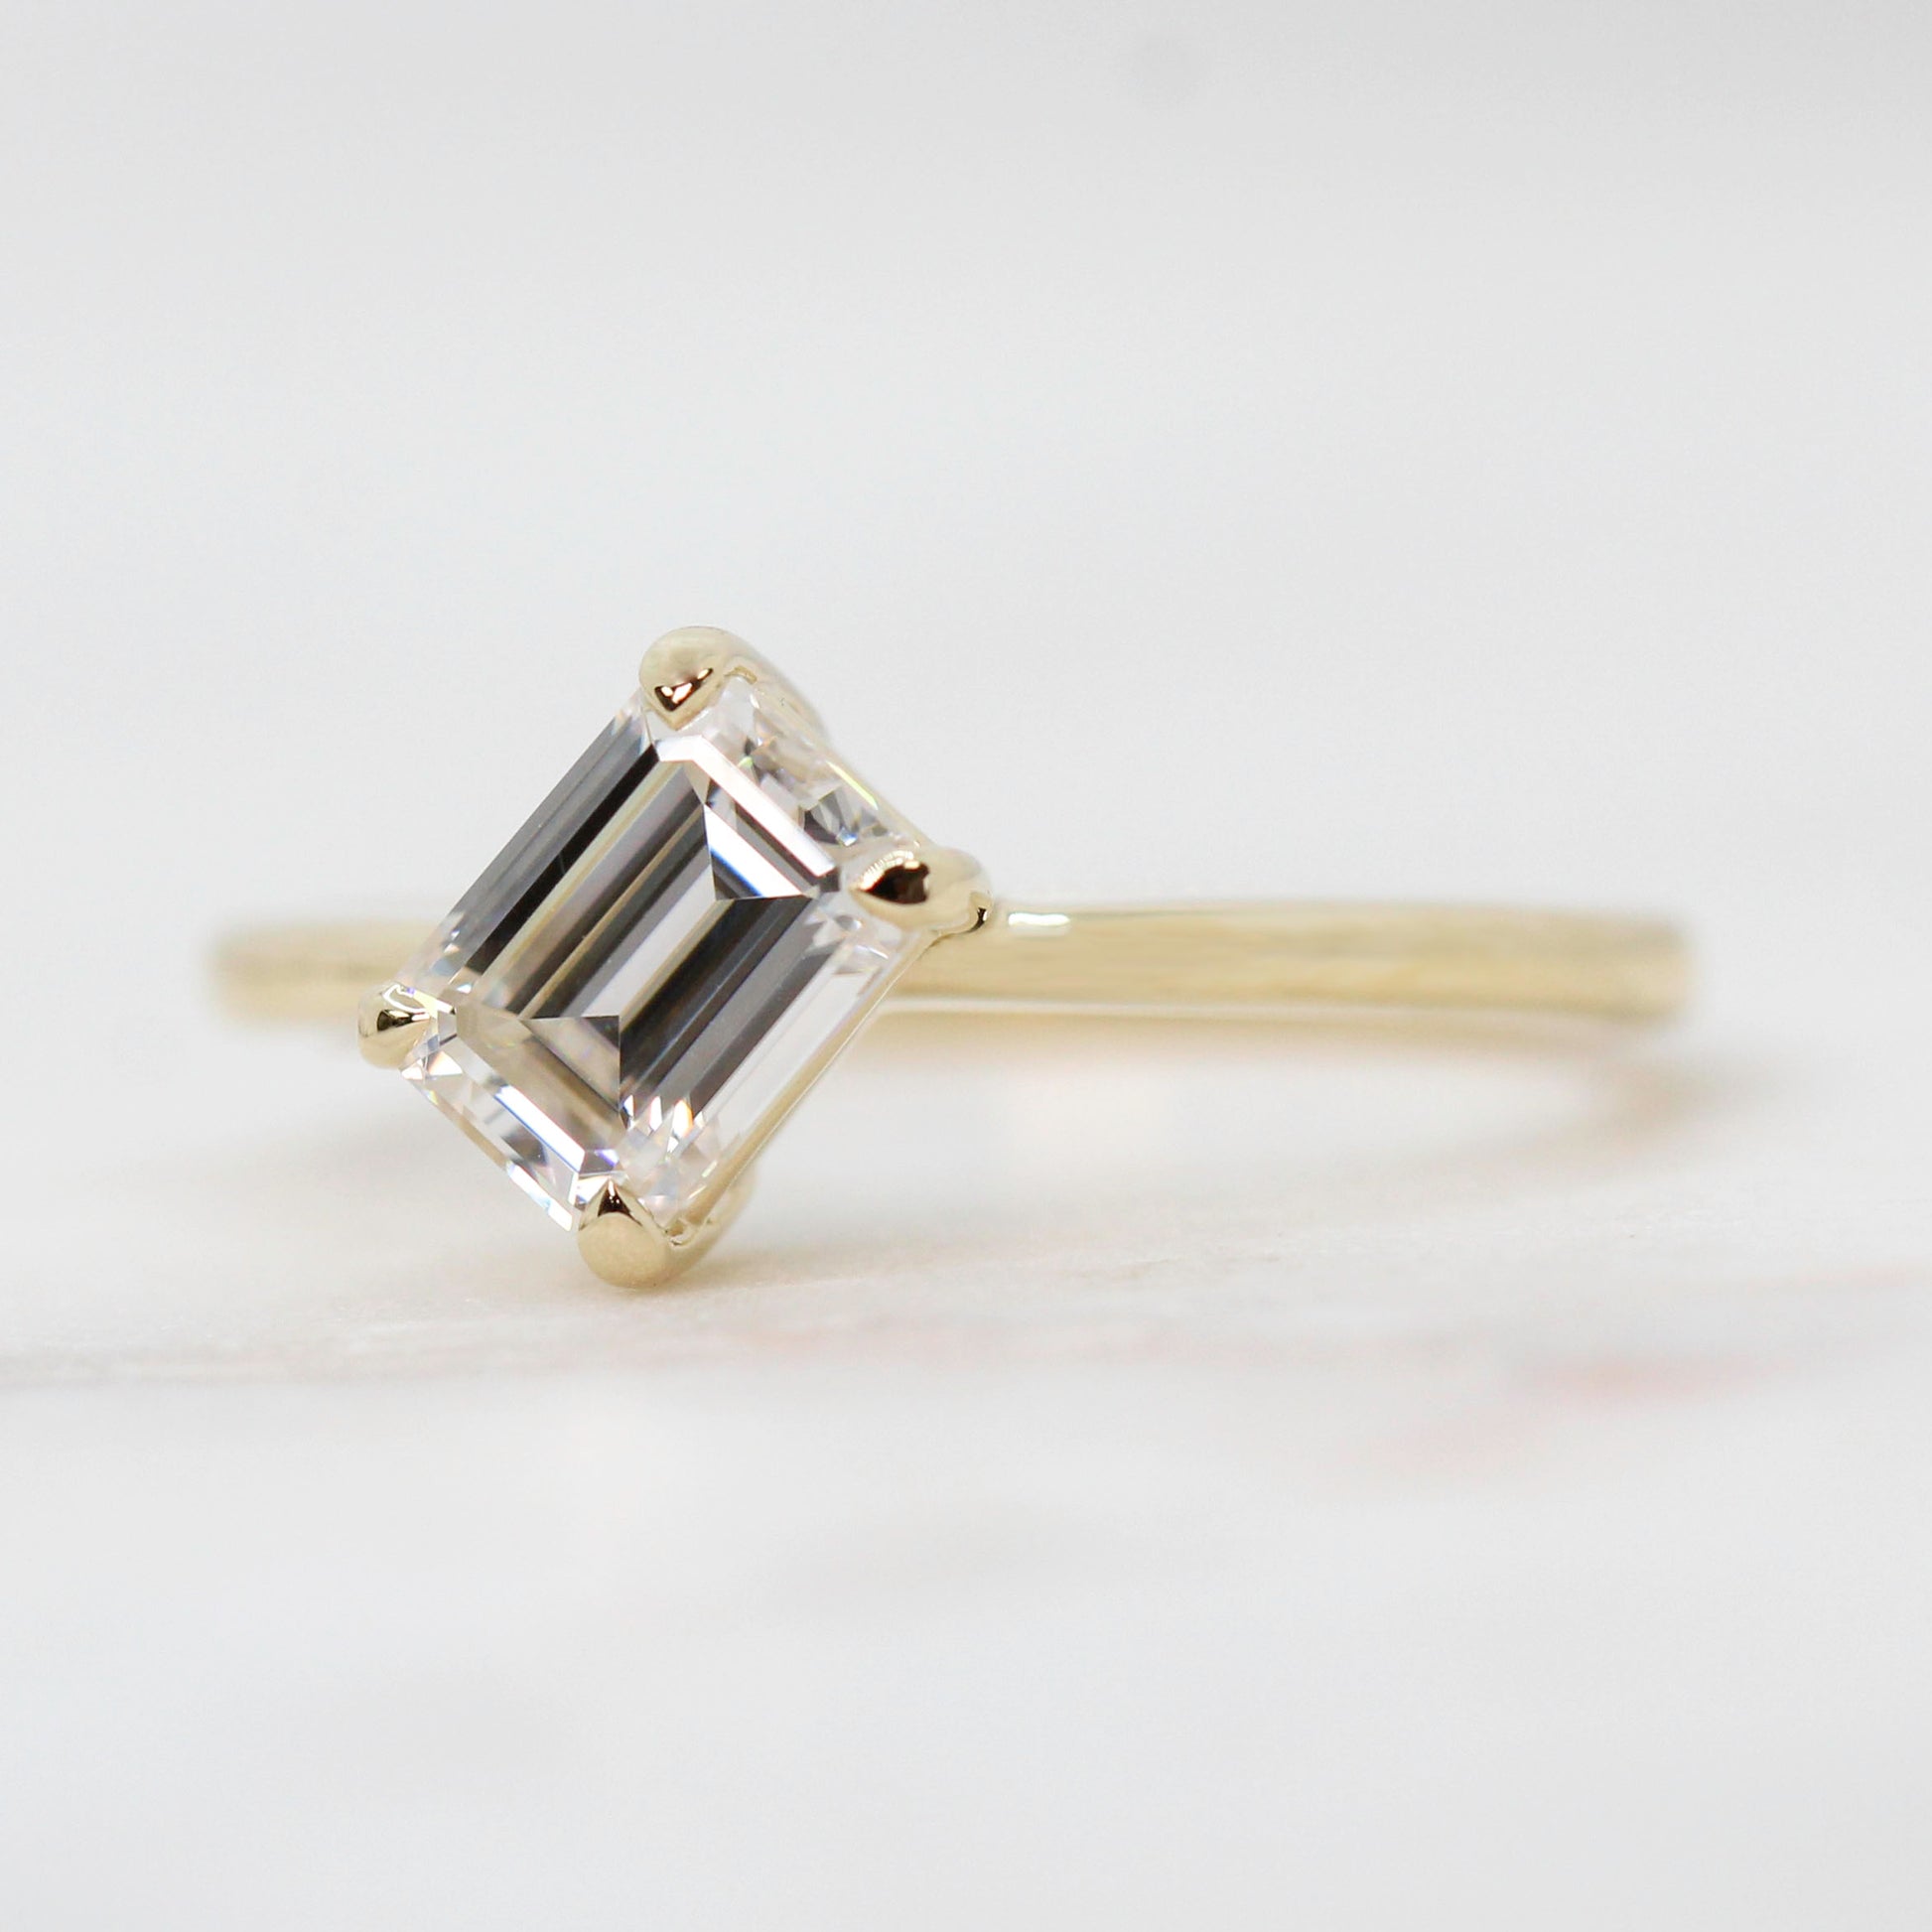 Natalia Ring with a 0.92 Carat White Moissanite in 14k Yellow Gold - Ready to Size and Ship - Midwinter Co. Alternative Bridal Rings and Modern Fine Jewelry